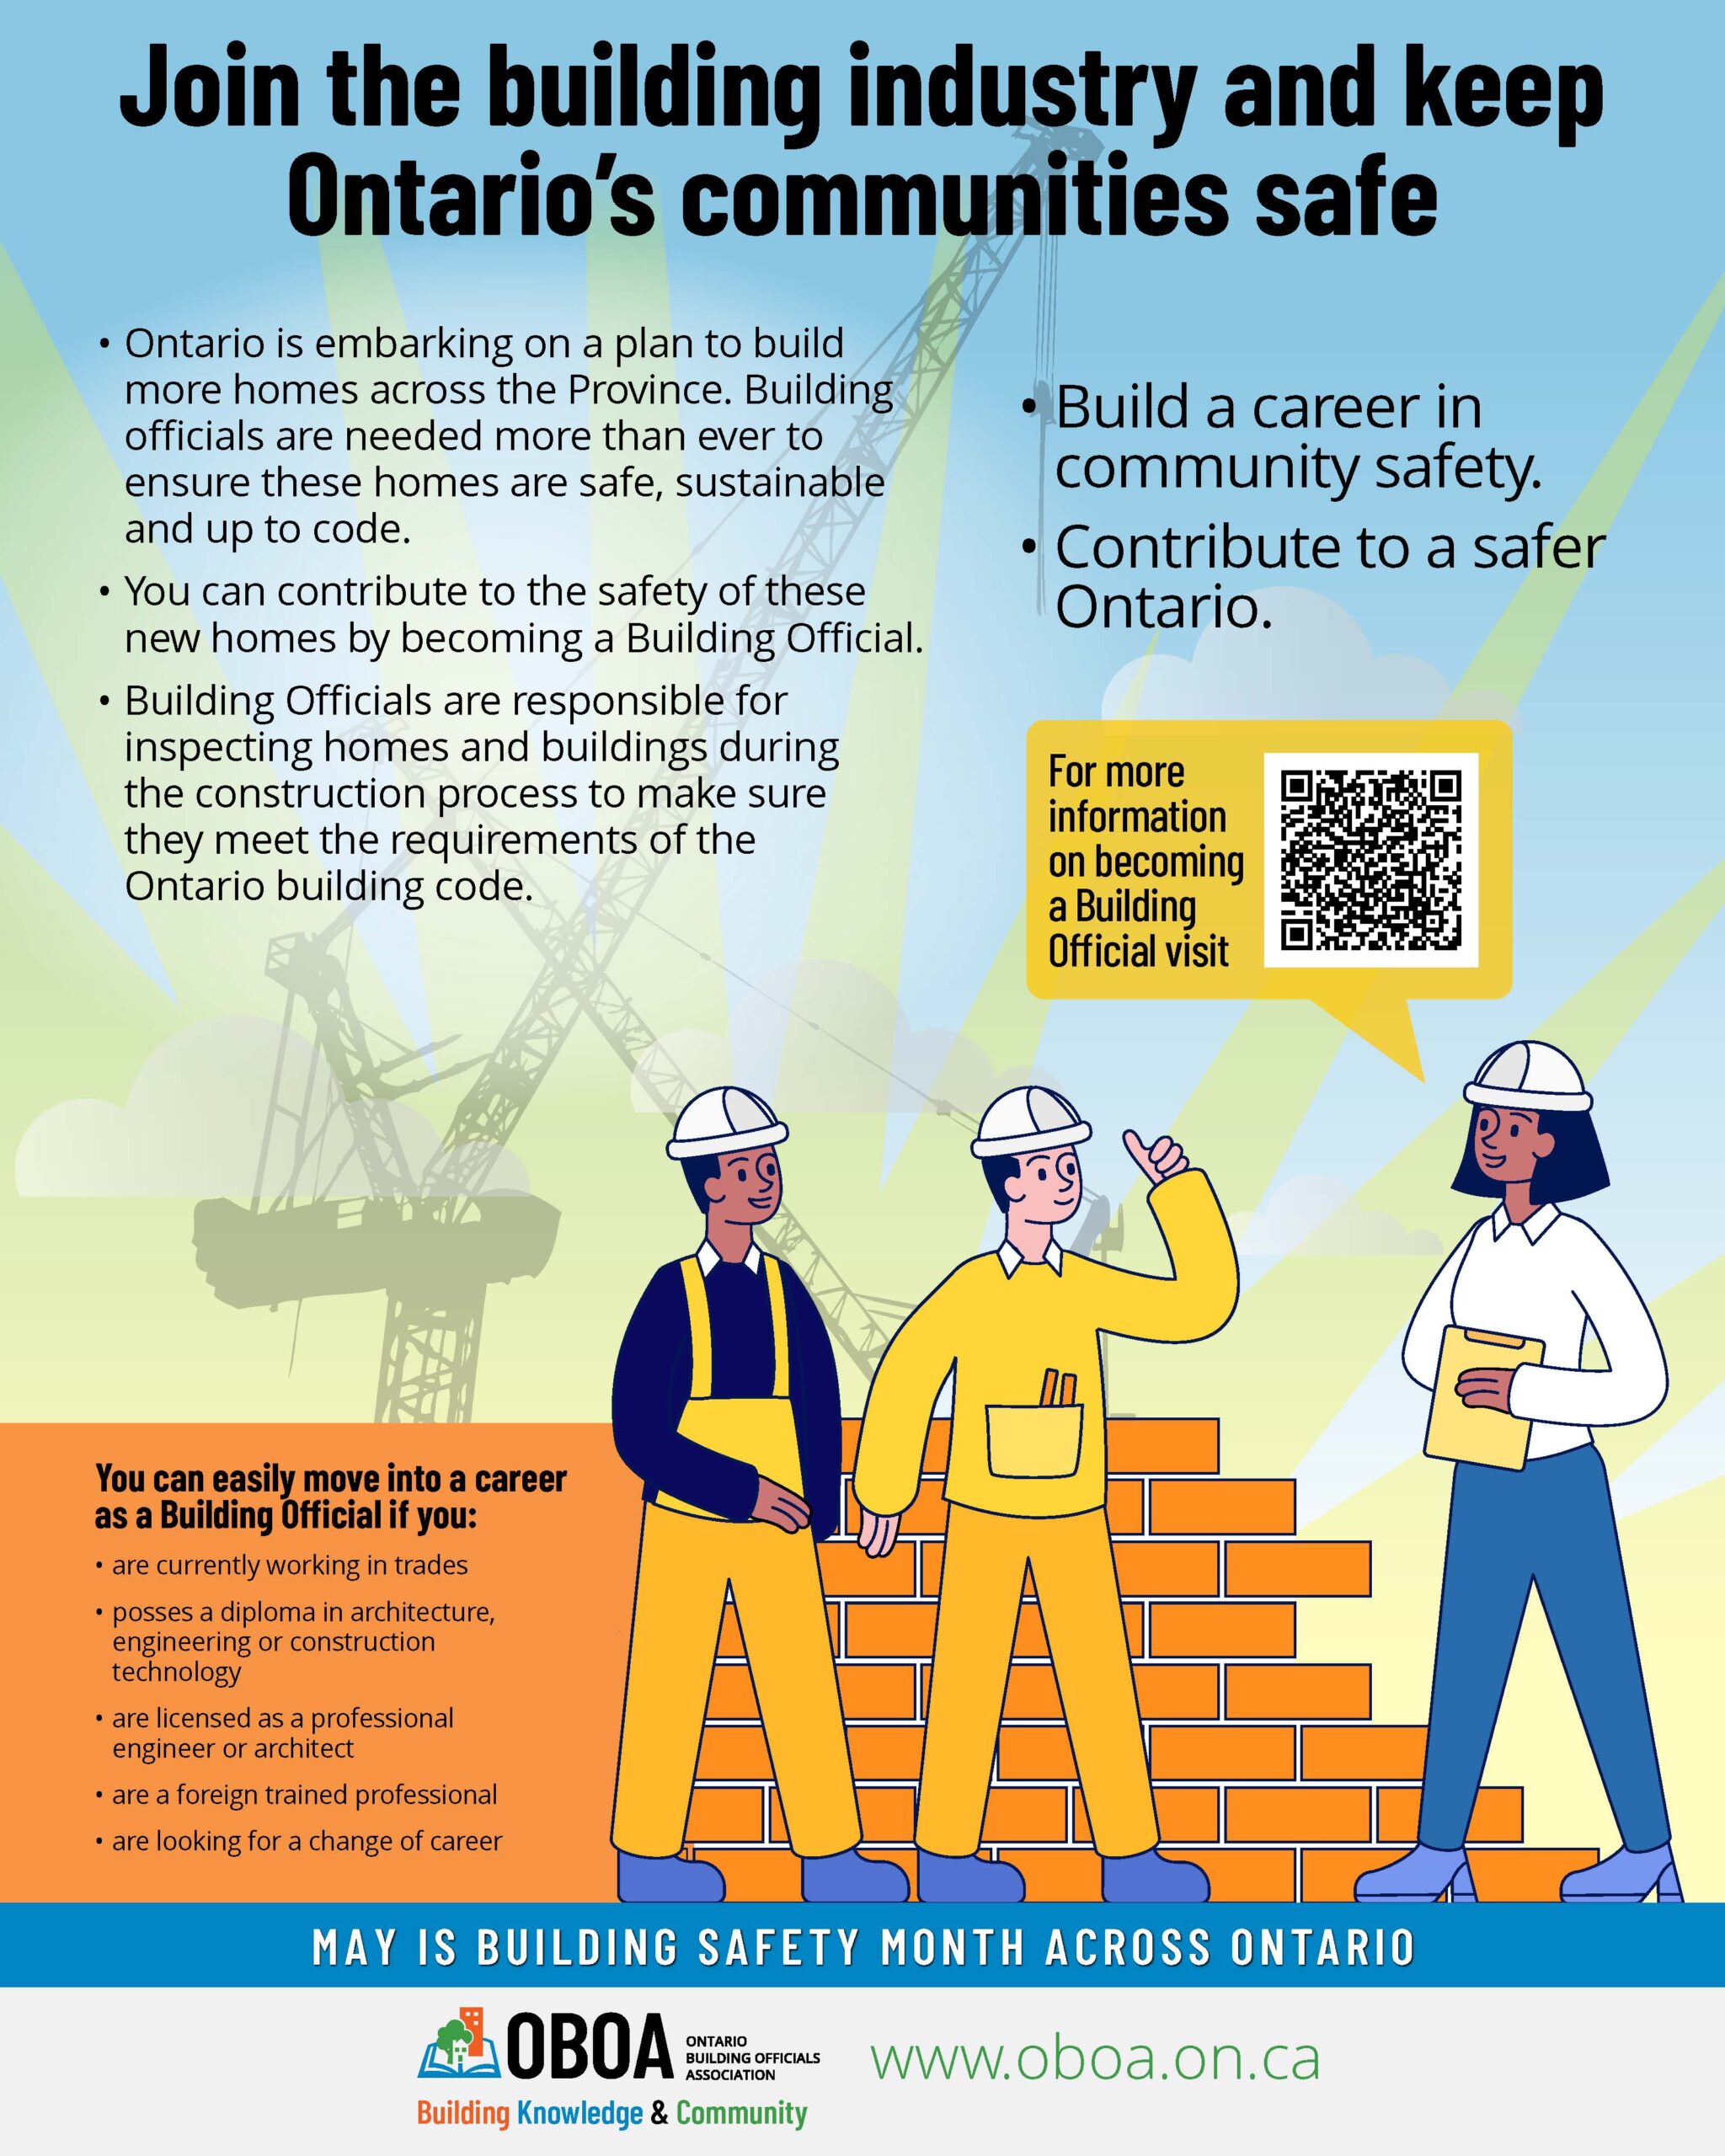 building safety month poster re: join the building industry and keep Ontario's communities safe